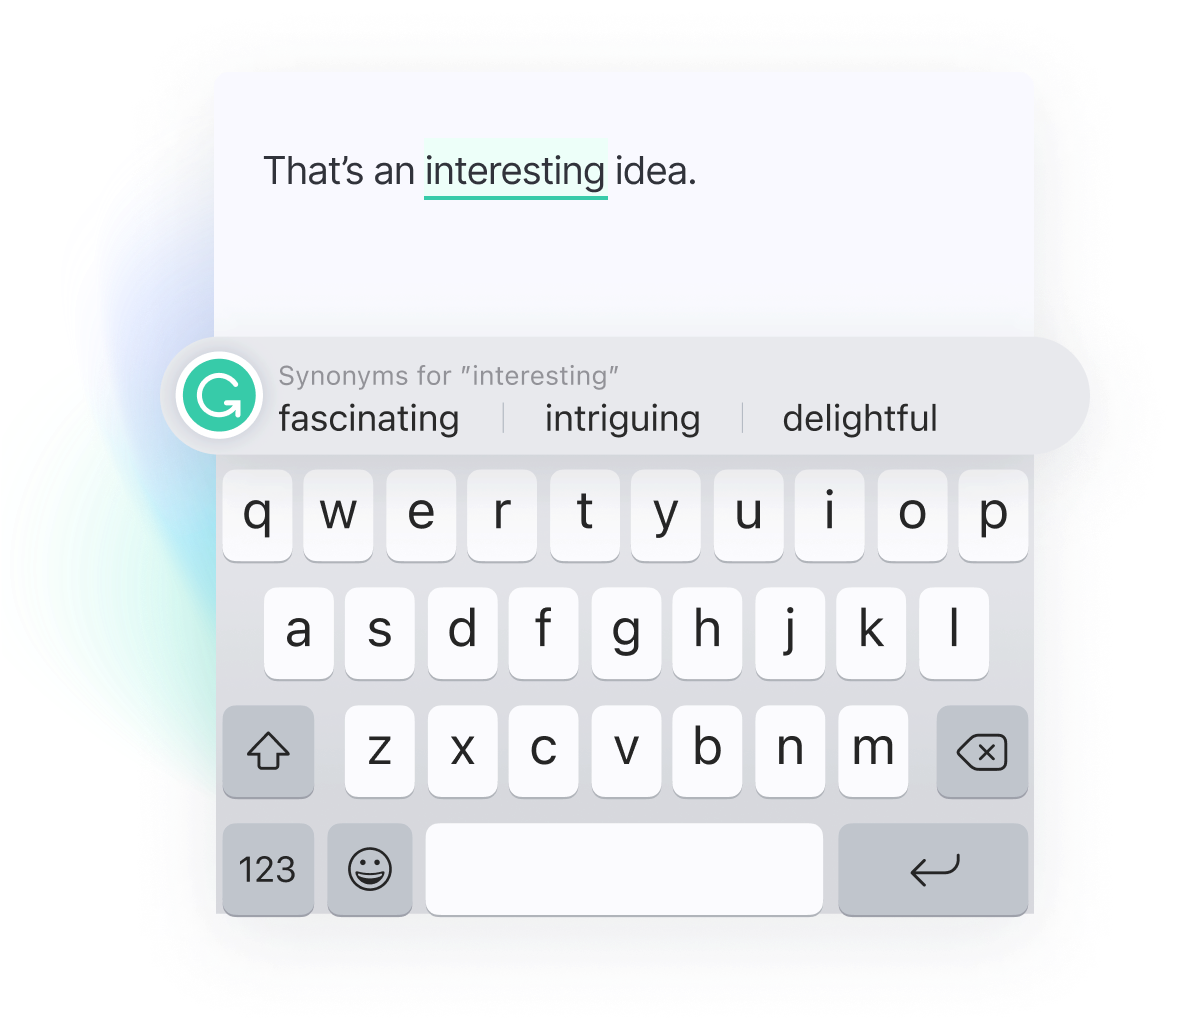 Example of how the Grammarly keyboard is used on a mobile device